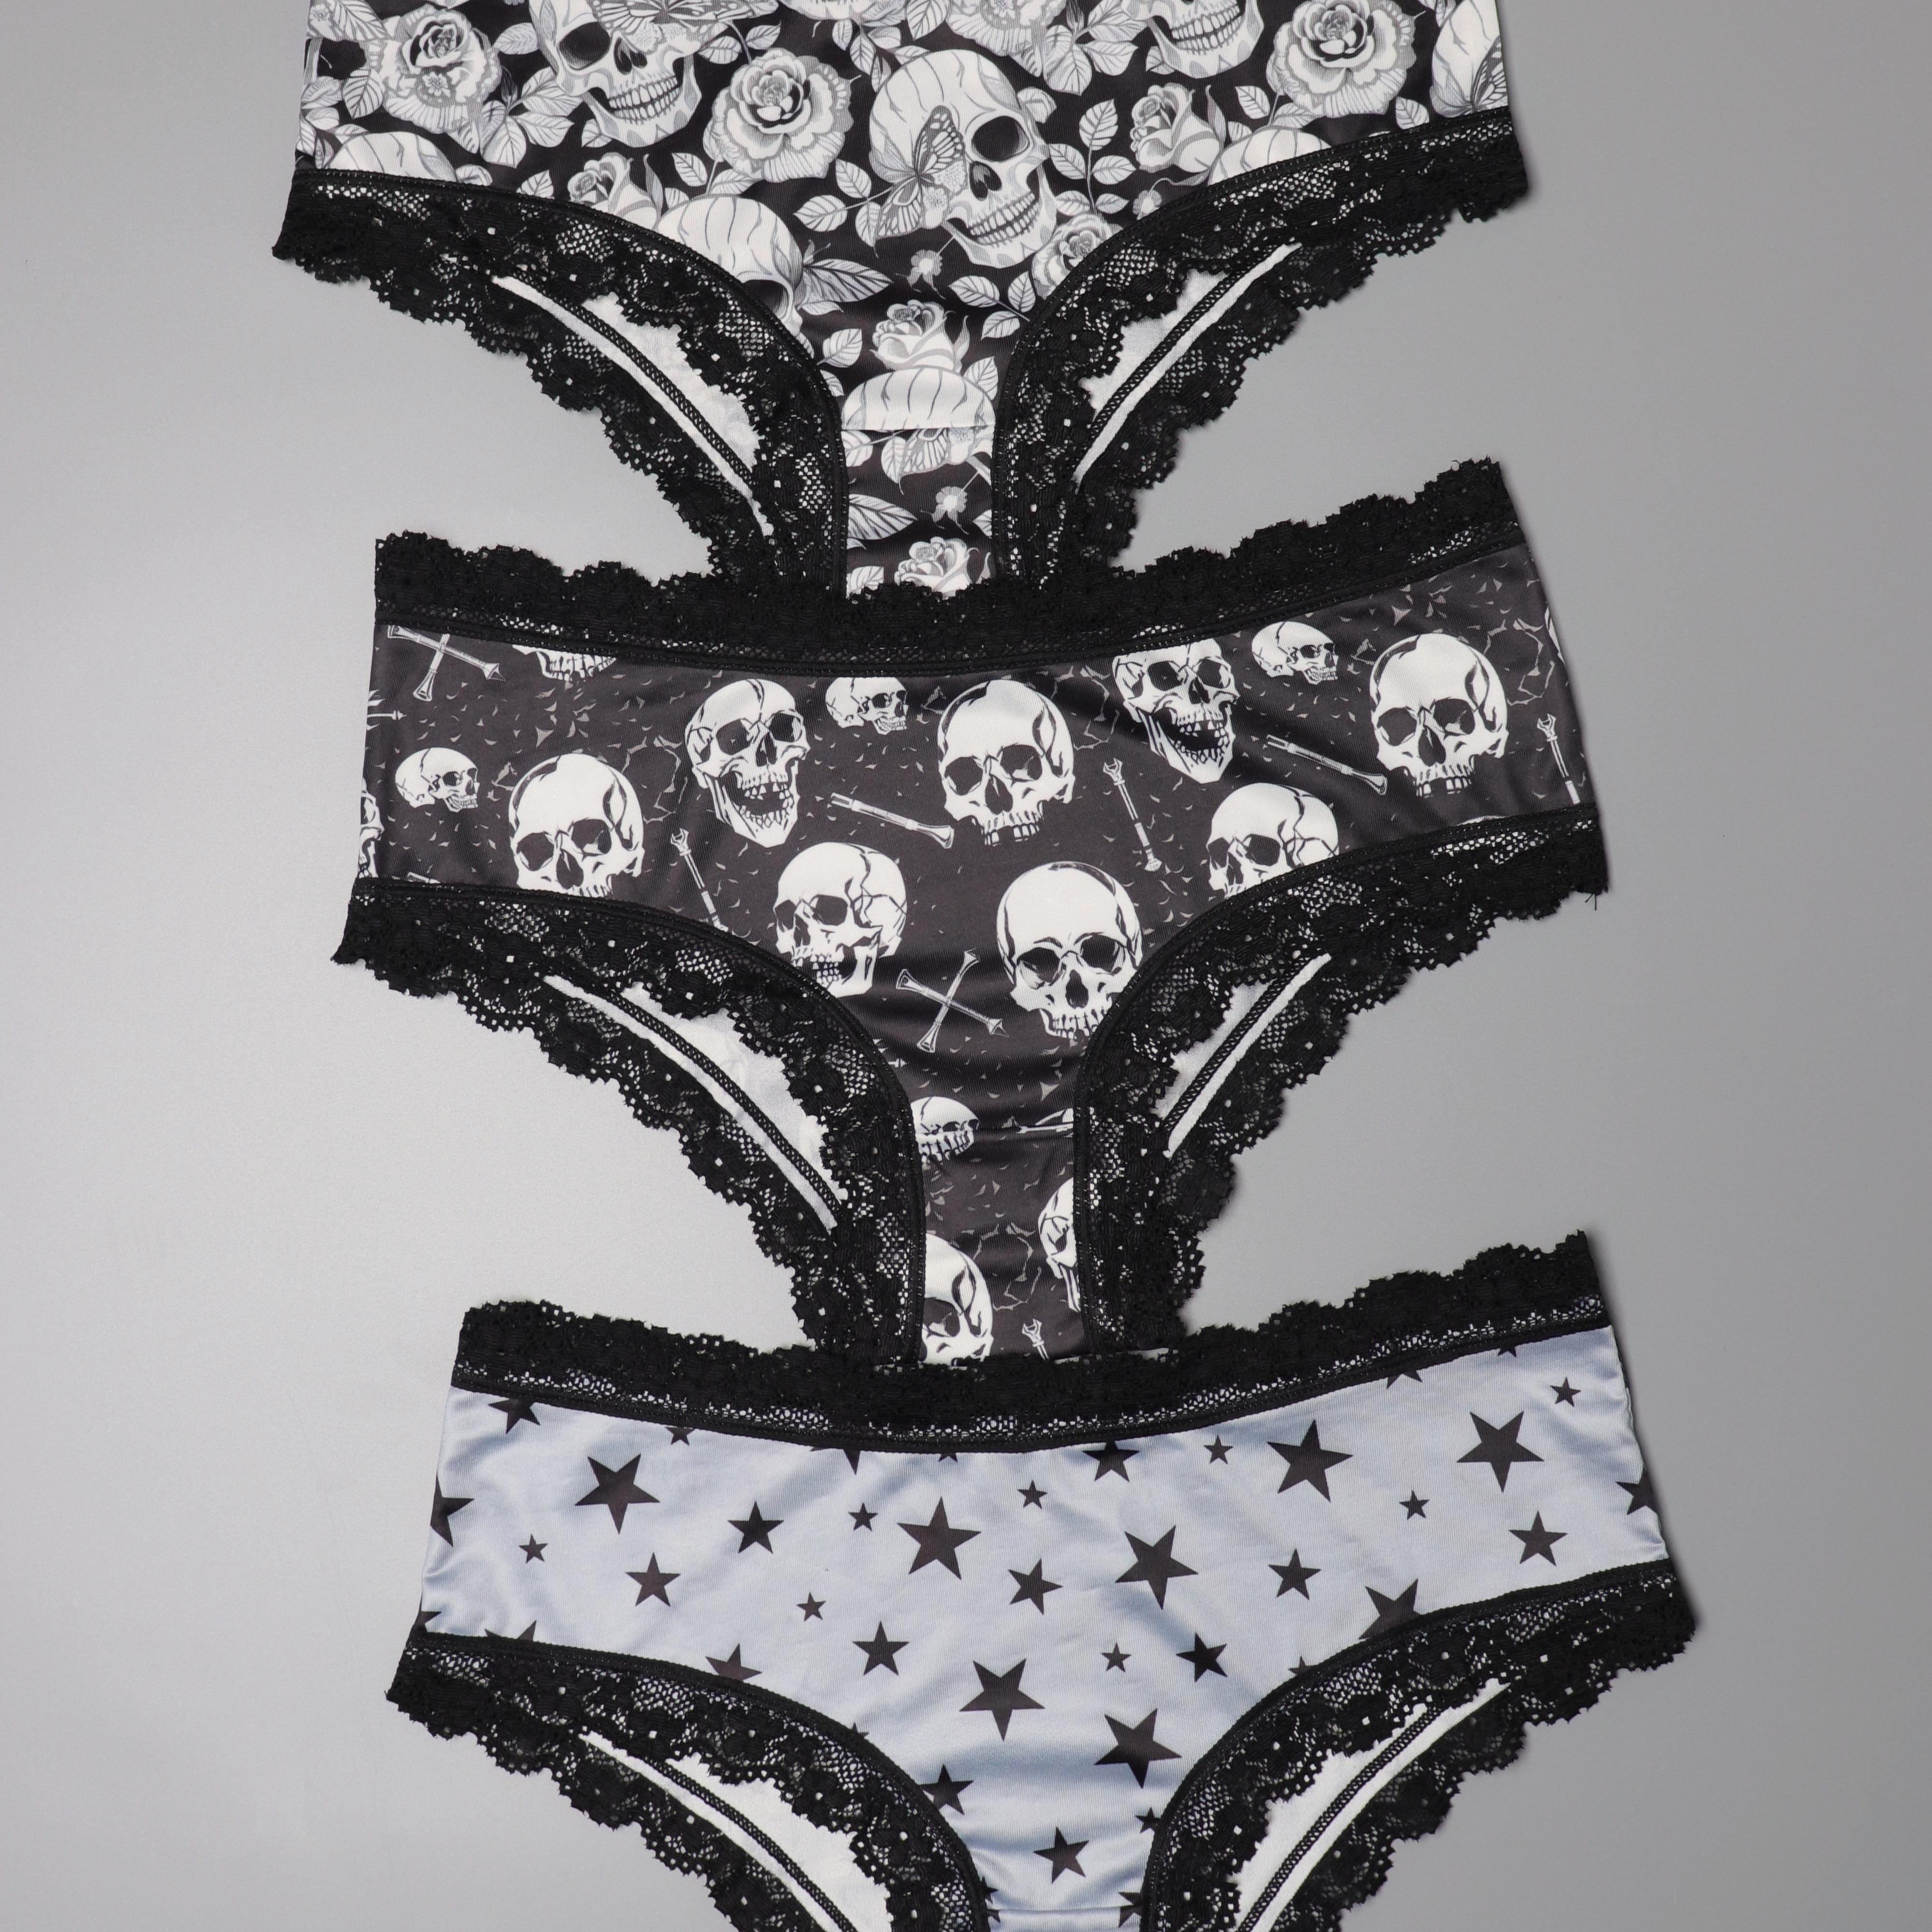 

3pcs Gothic Contrast Lace Hipster Panties, Halloween Skull & Star Print Intimates Panties, Women's Underwear & Lingerie